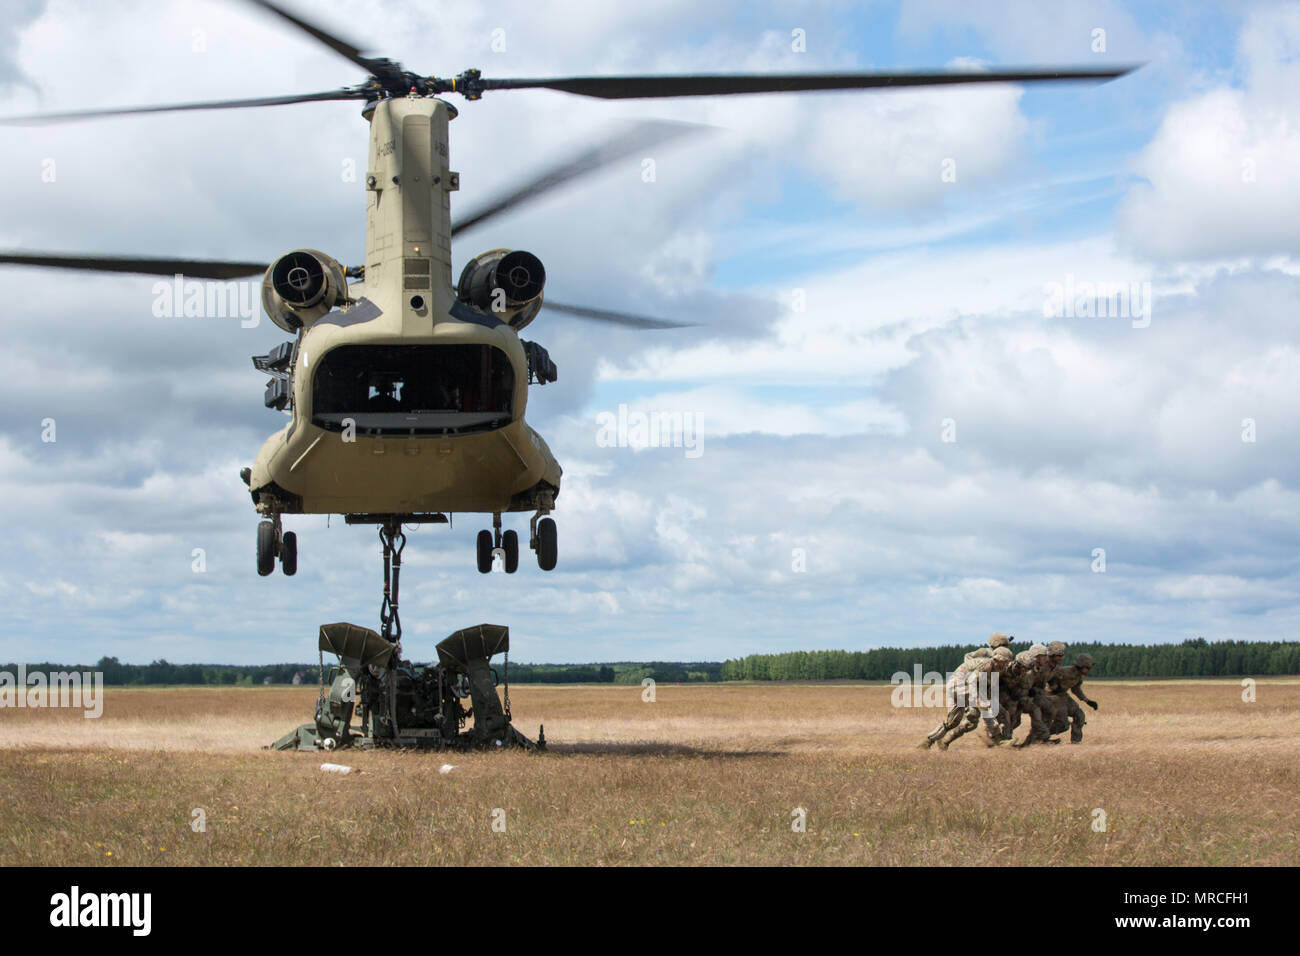 Battle Group Poland U.S. Soldiers, assigned to Bulldog Battery, 2nd Squadron, 2nd Cavalry Regiment, along with 10th Mountain Combat Aviation Brigade, conduct sling load and air assault training with M777A2 Howitzers, during Saber Strike 2017, at Bemowo Piskie Training Area near Orzysz, Poland, June 7, 2017. Saber Strike17 is a U.S. Army Europe-led multinational combined forces exercise conducted annually to enhance the NATO alliance throughout the Baltic region and Poland. This year's exercise includes integrated and synchronized deterrence-oriented training designed to improve interoperabilit Stock Photo